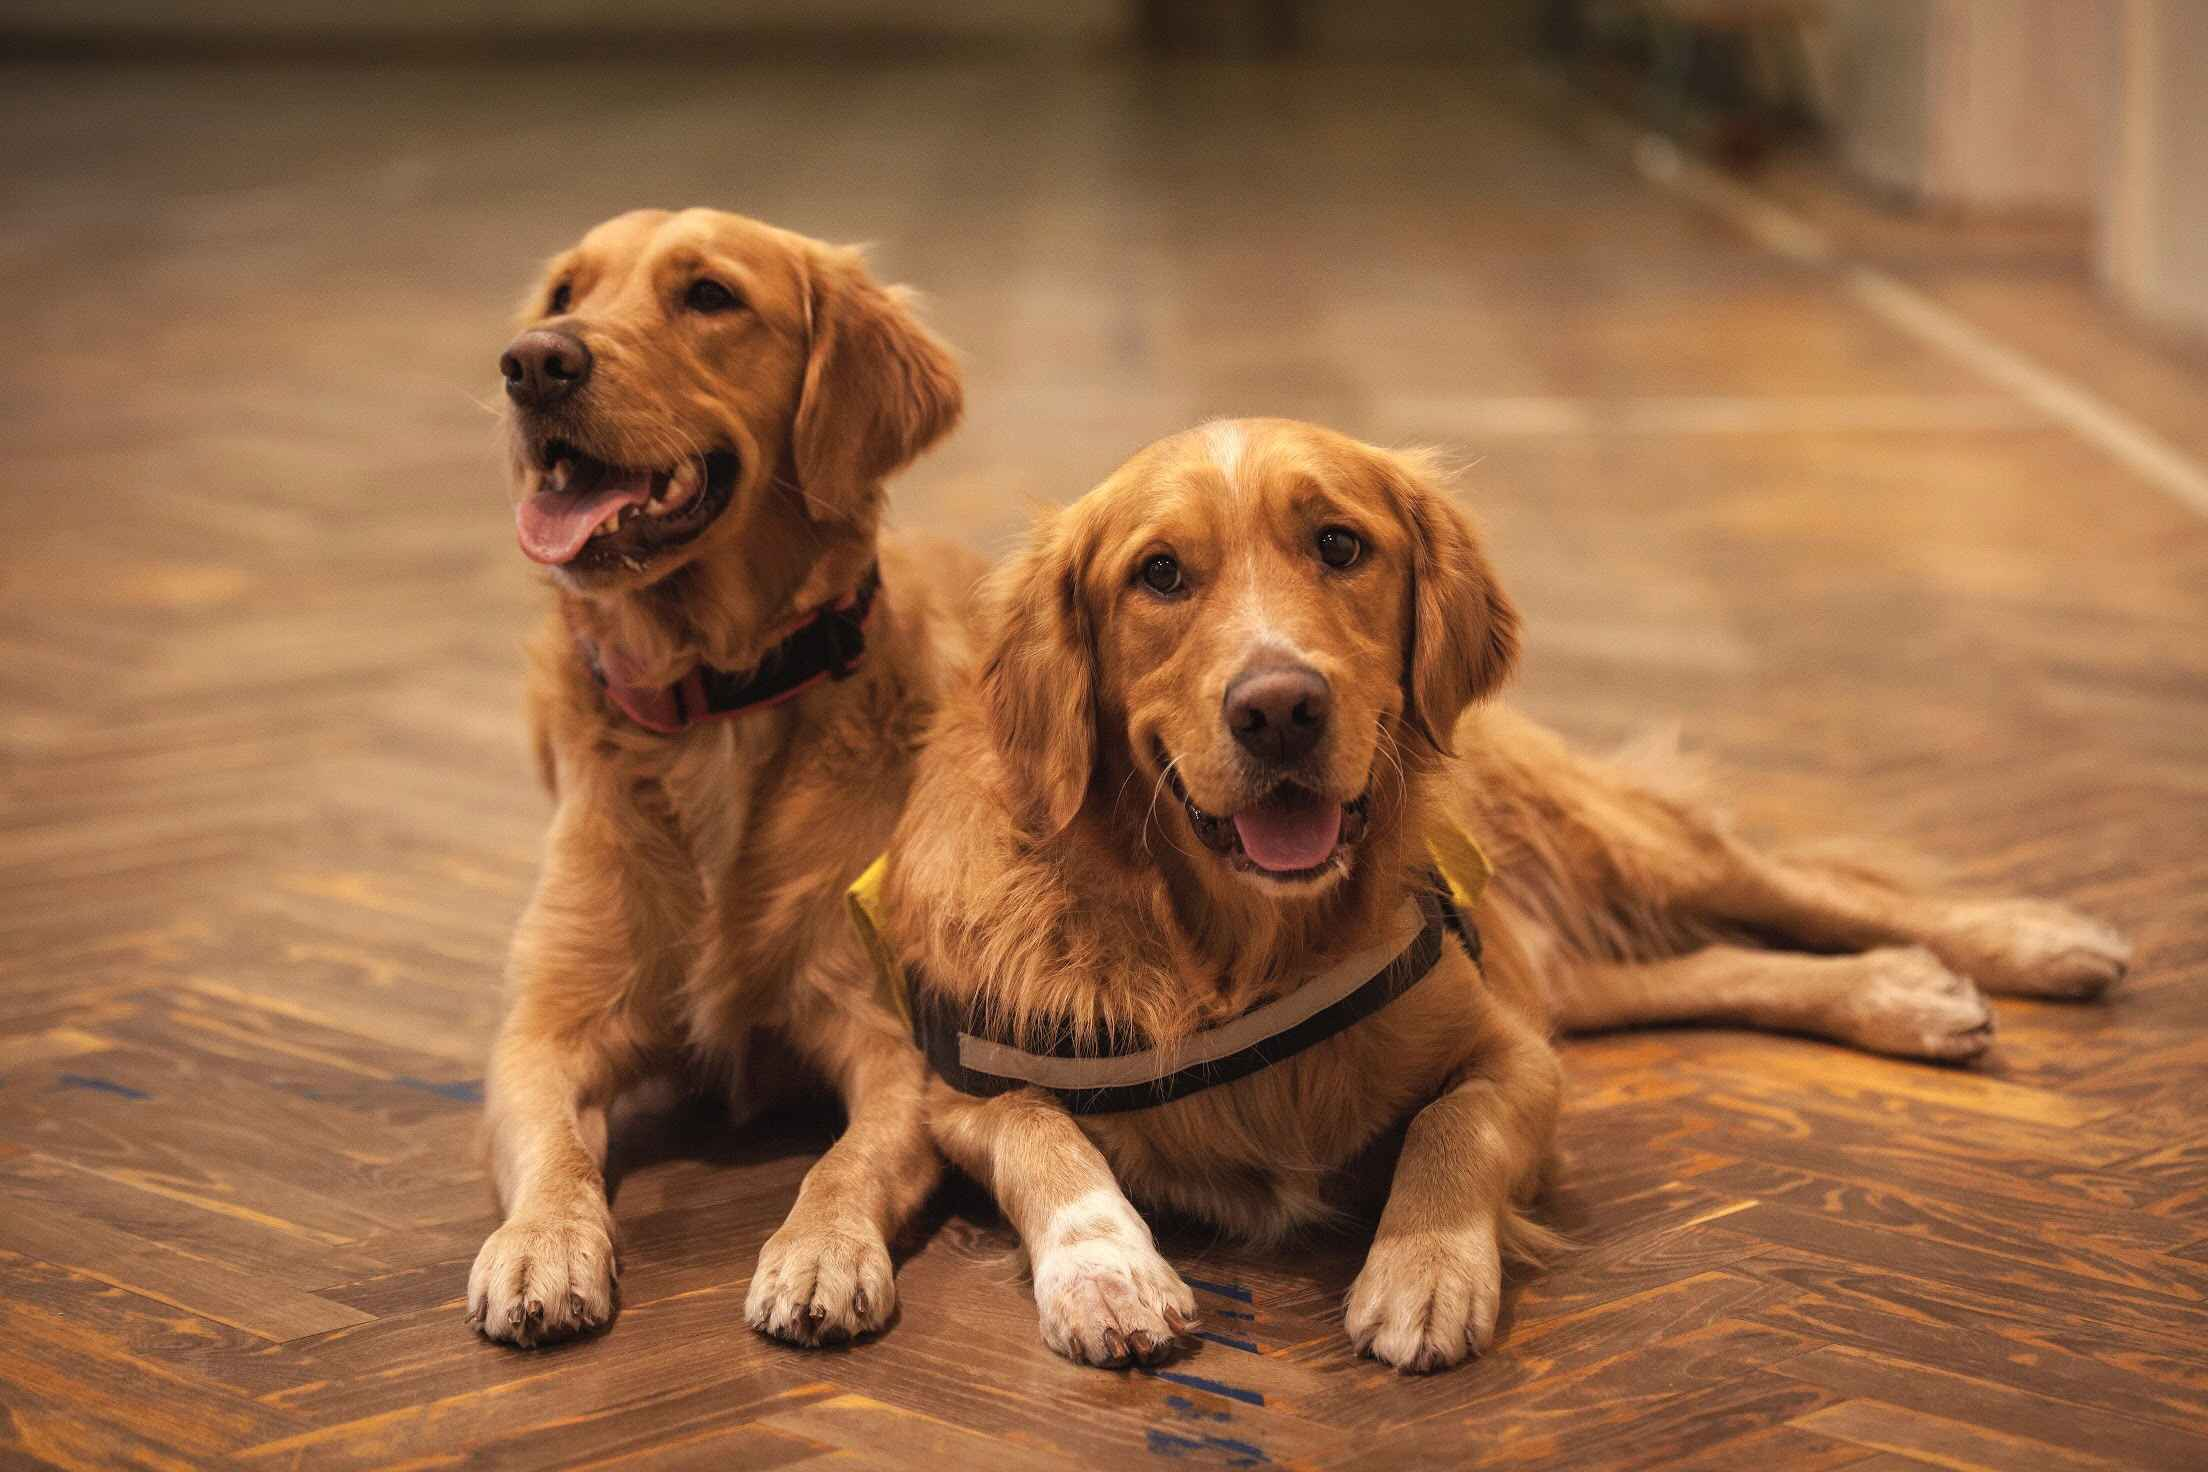 Are there any specific training techniques that are effective for golden retrievers?